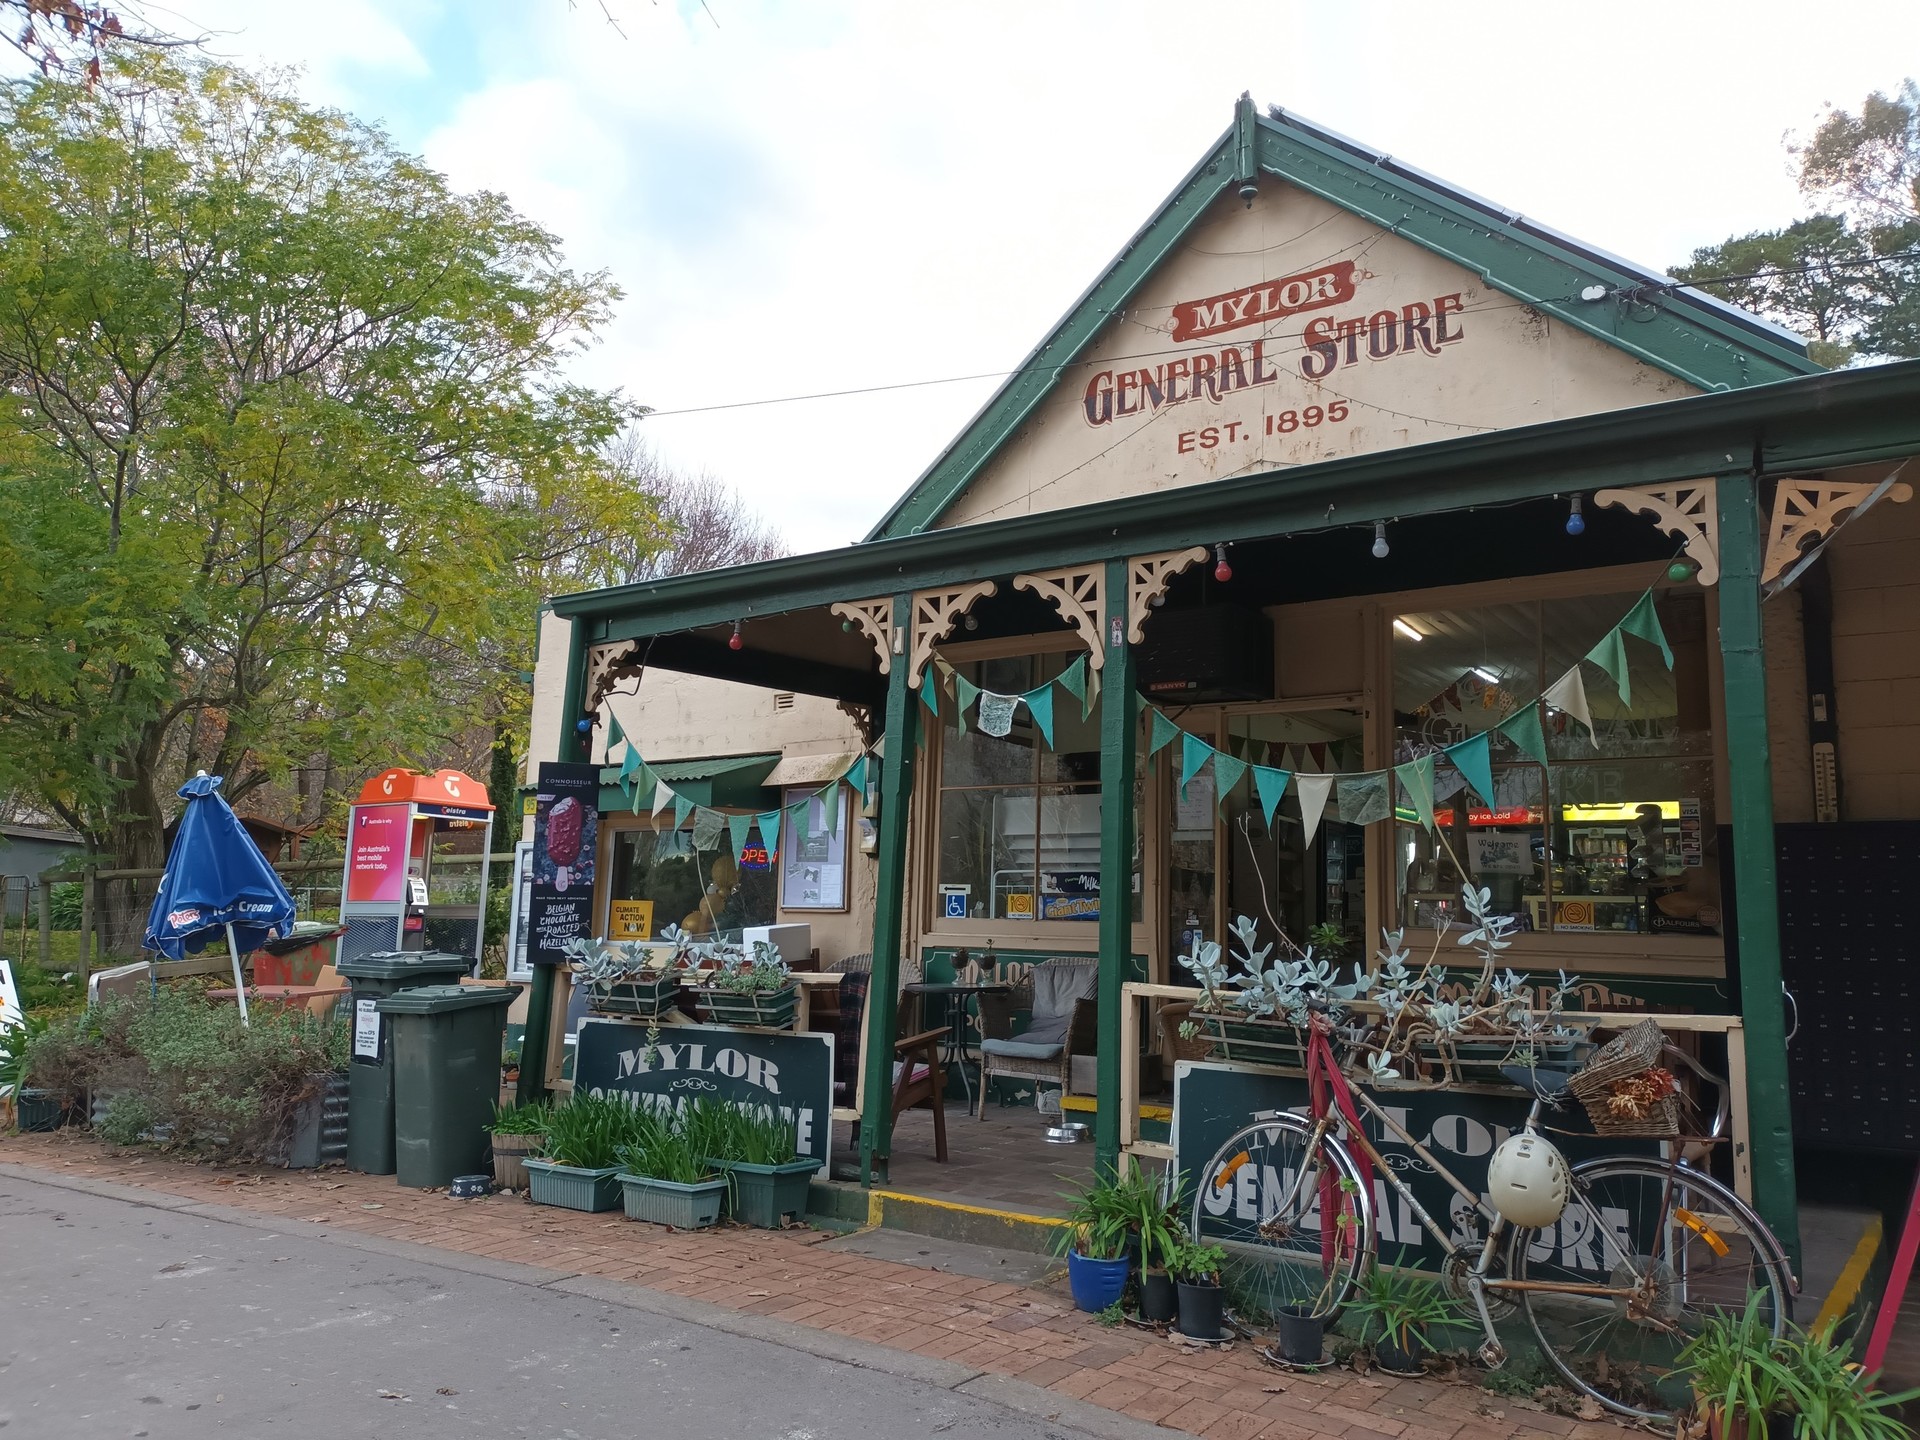 General Store in the Adelaide Hills – Mylor S...Business For Sale